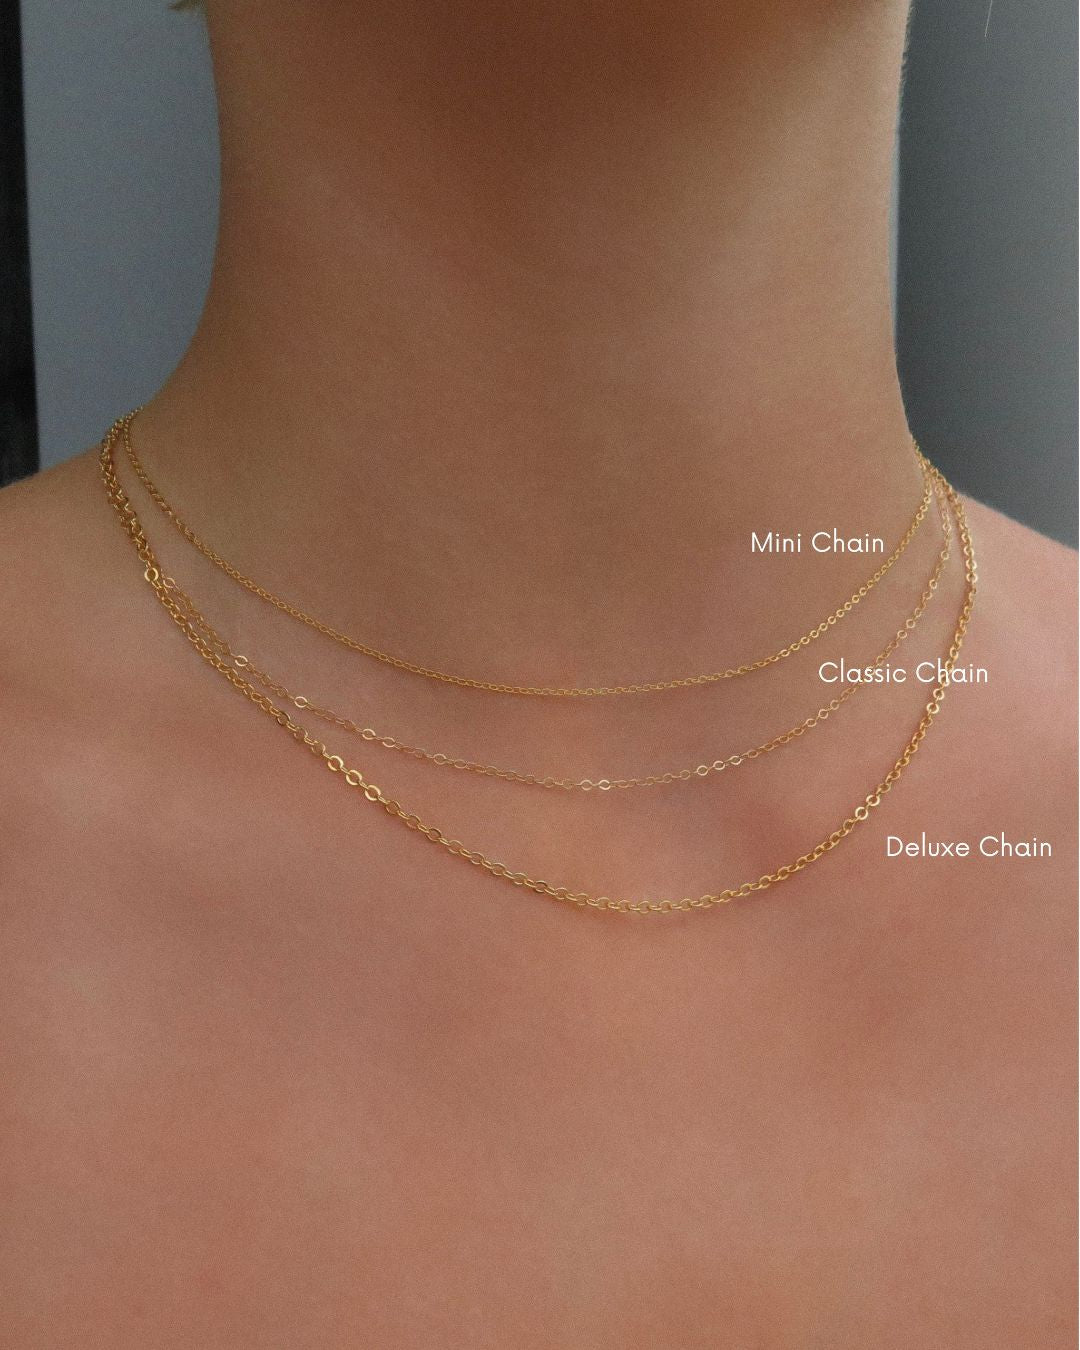 Boy Kisses Girl Necklace  - 14k Yellow Gold Fill